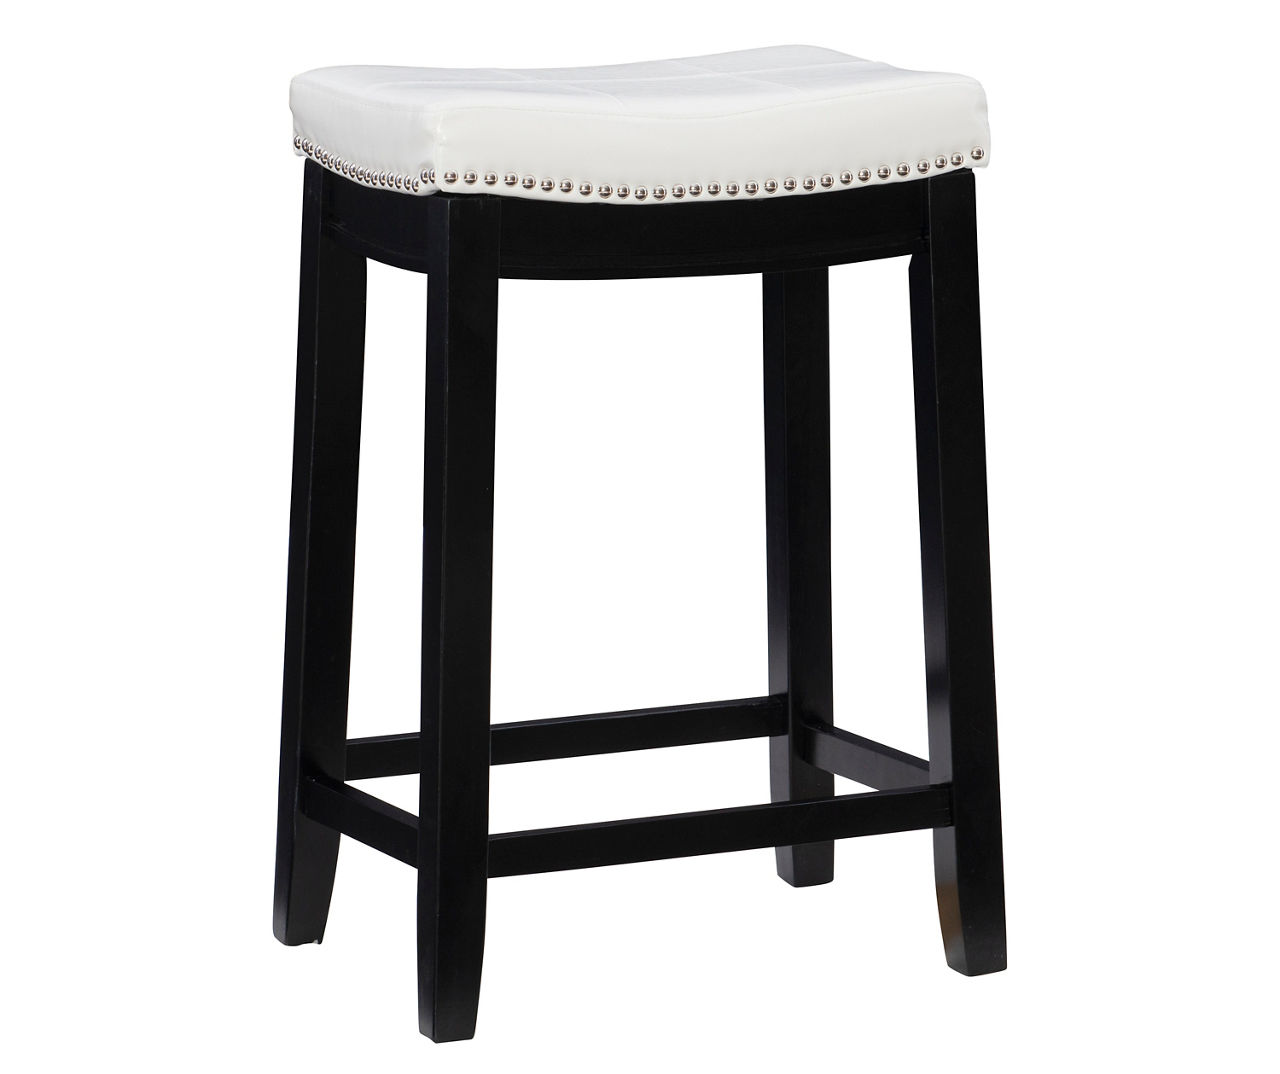 24" Brooke White Faux Leather Backless Counter Stool